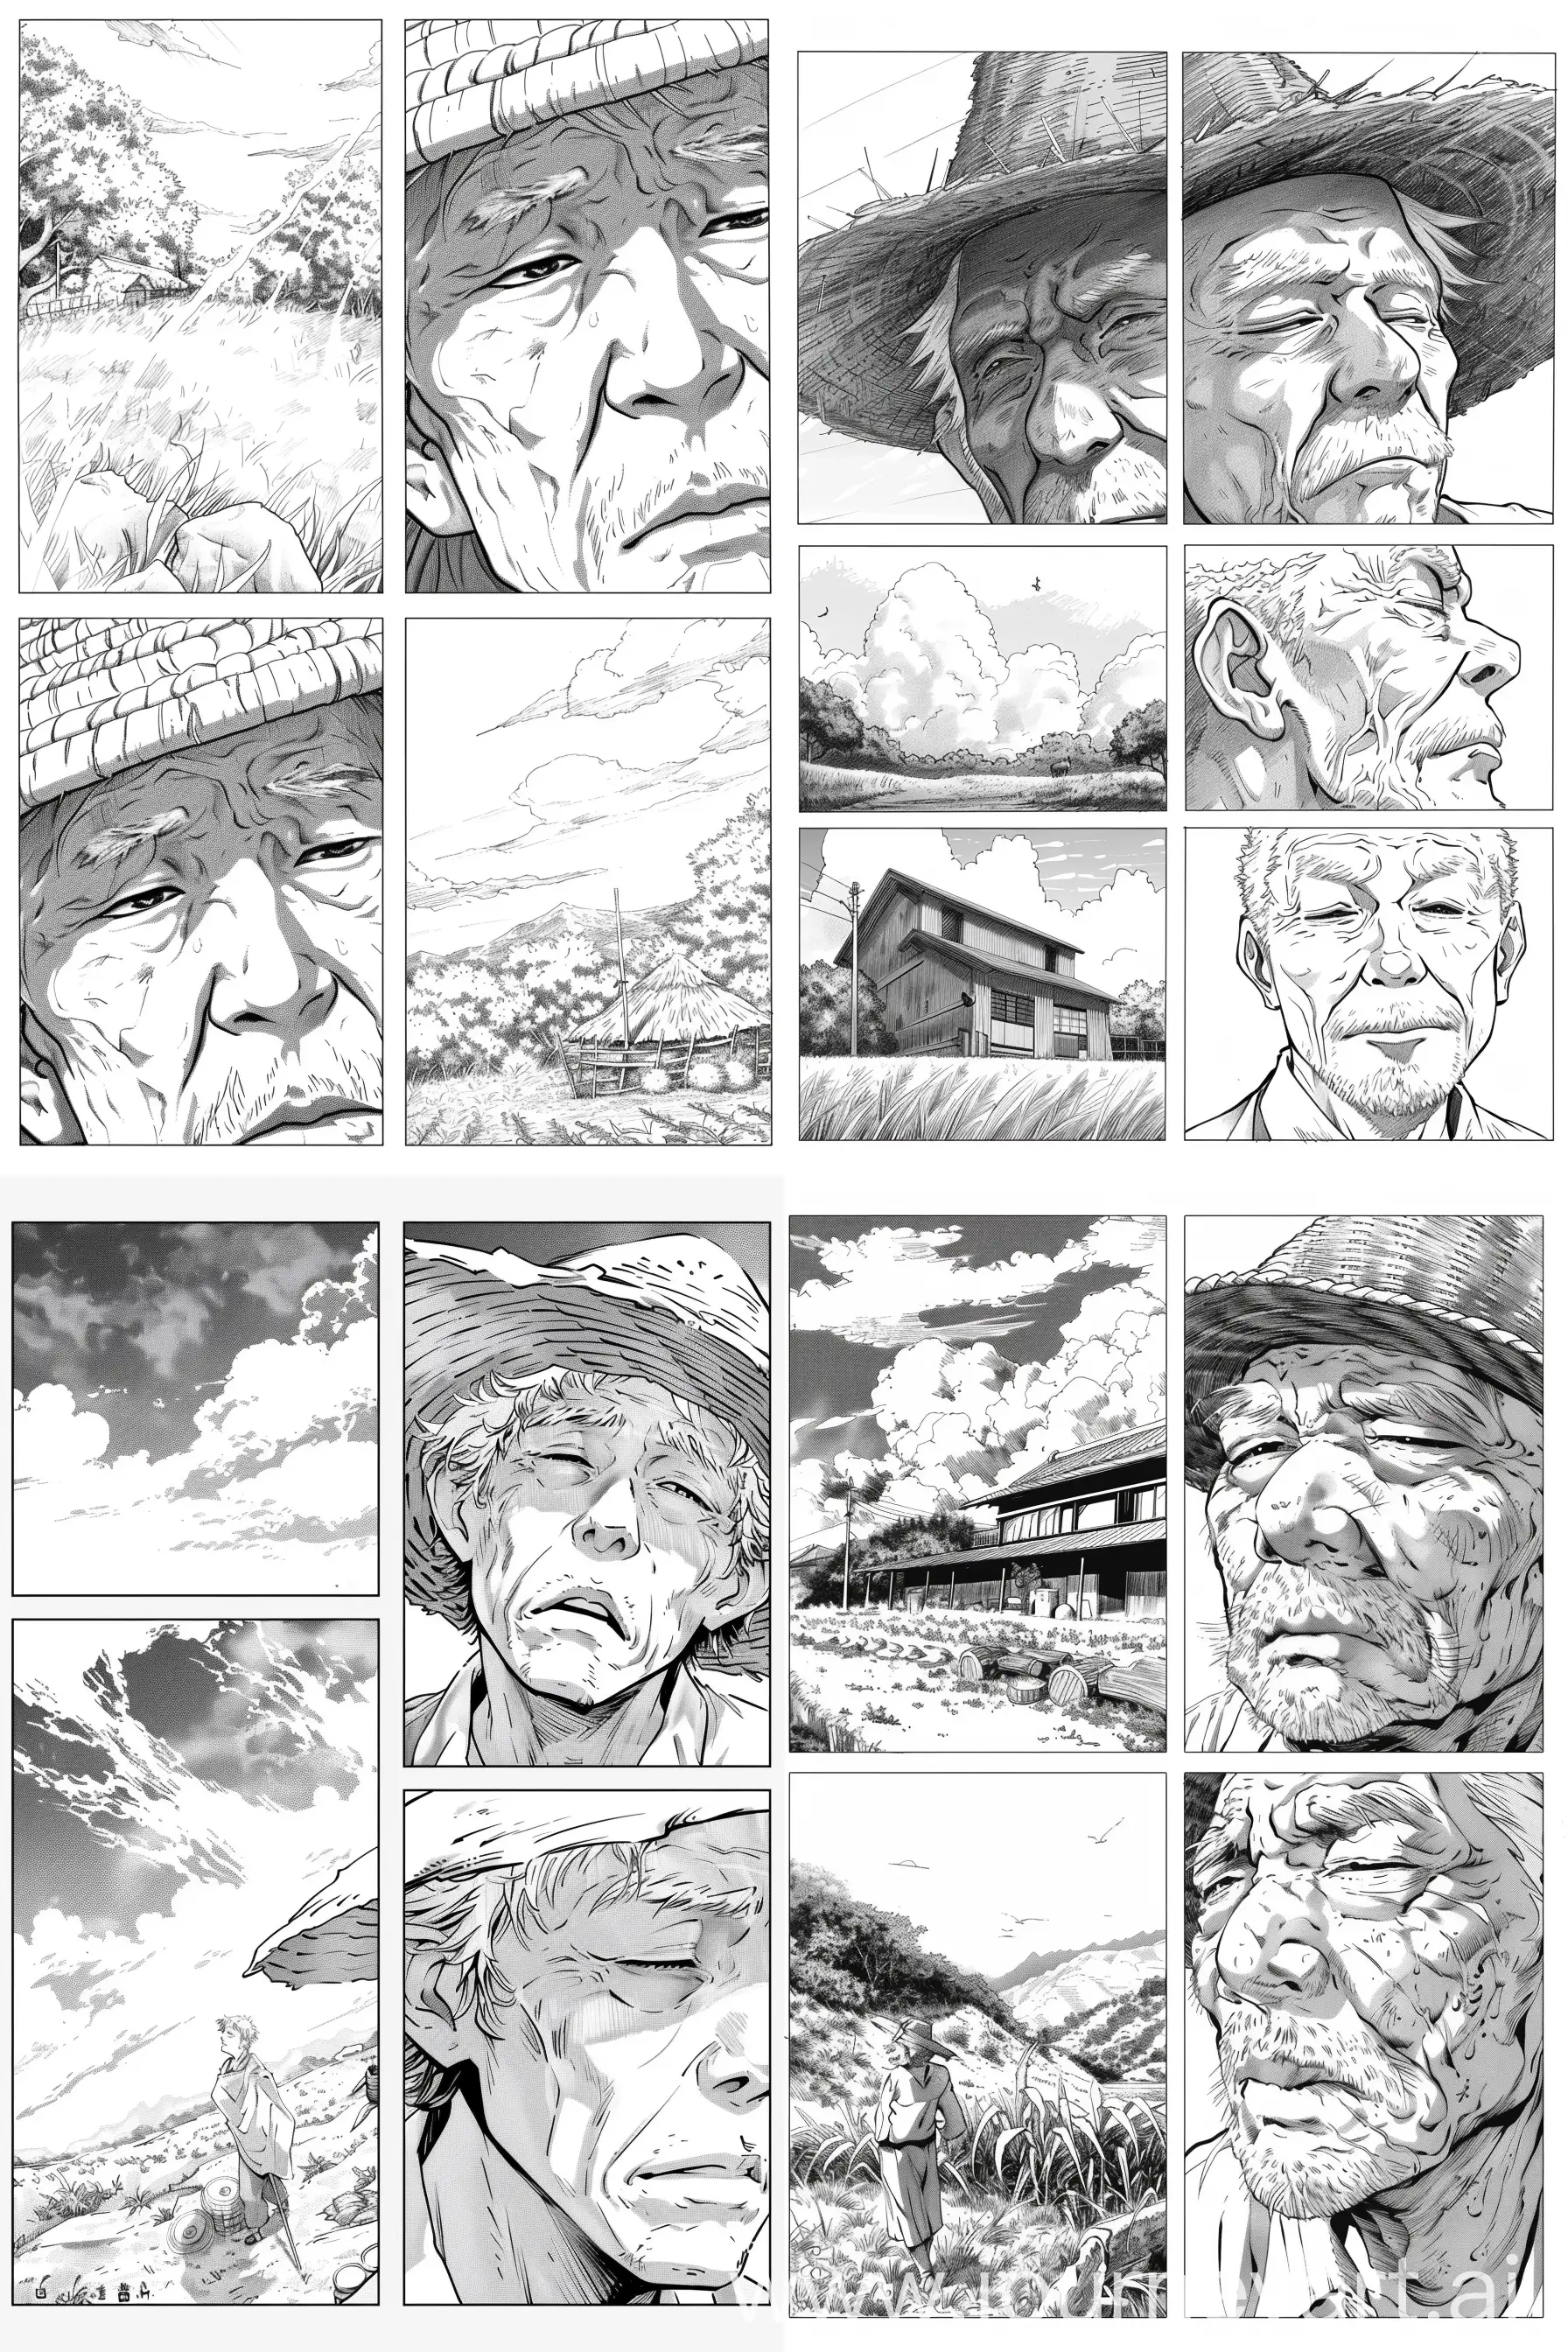 A manga page with 4 pictures, manga anime style,black and white , Charcater:akhura a 55 year old man,who was a legend,fighter and protecter but after many years he is now living a simple life far away, he is working in his farm,he has short lips,white hairs and some wrinkles,he is wearing a straw hat and simple clothes,his eyes are normal and nose is also  normal,in 2nd image he starts looking at the sky,in 3rd image he closes his eyes and starts thinking. --ar 2:3 